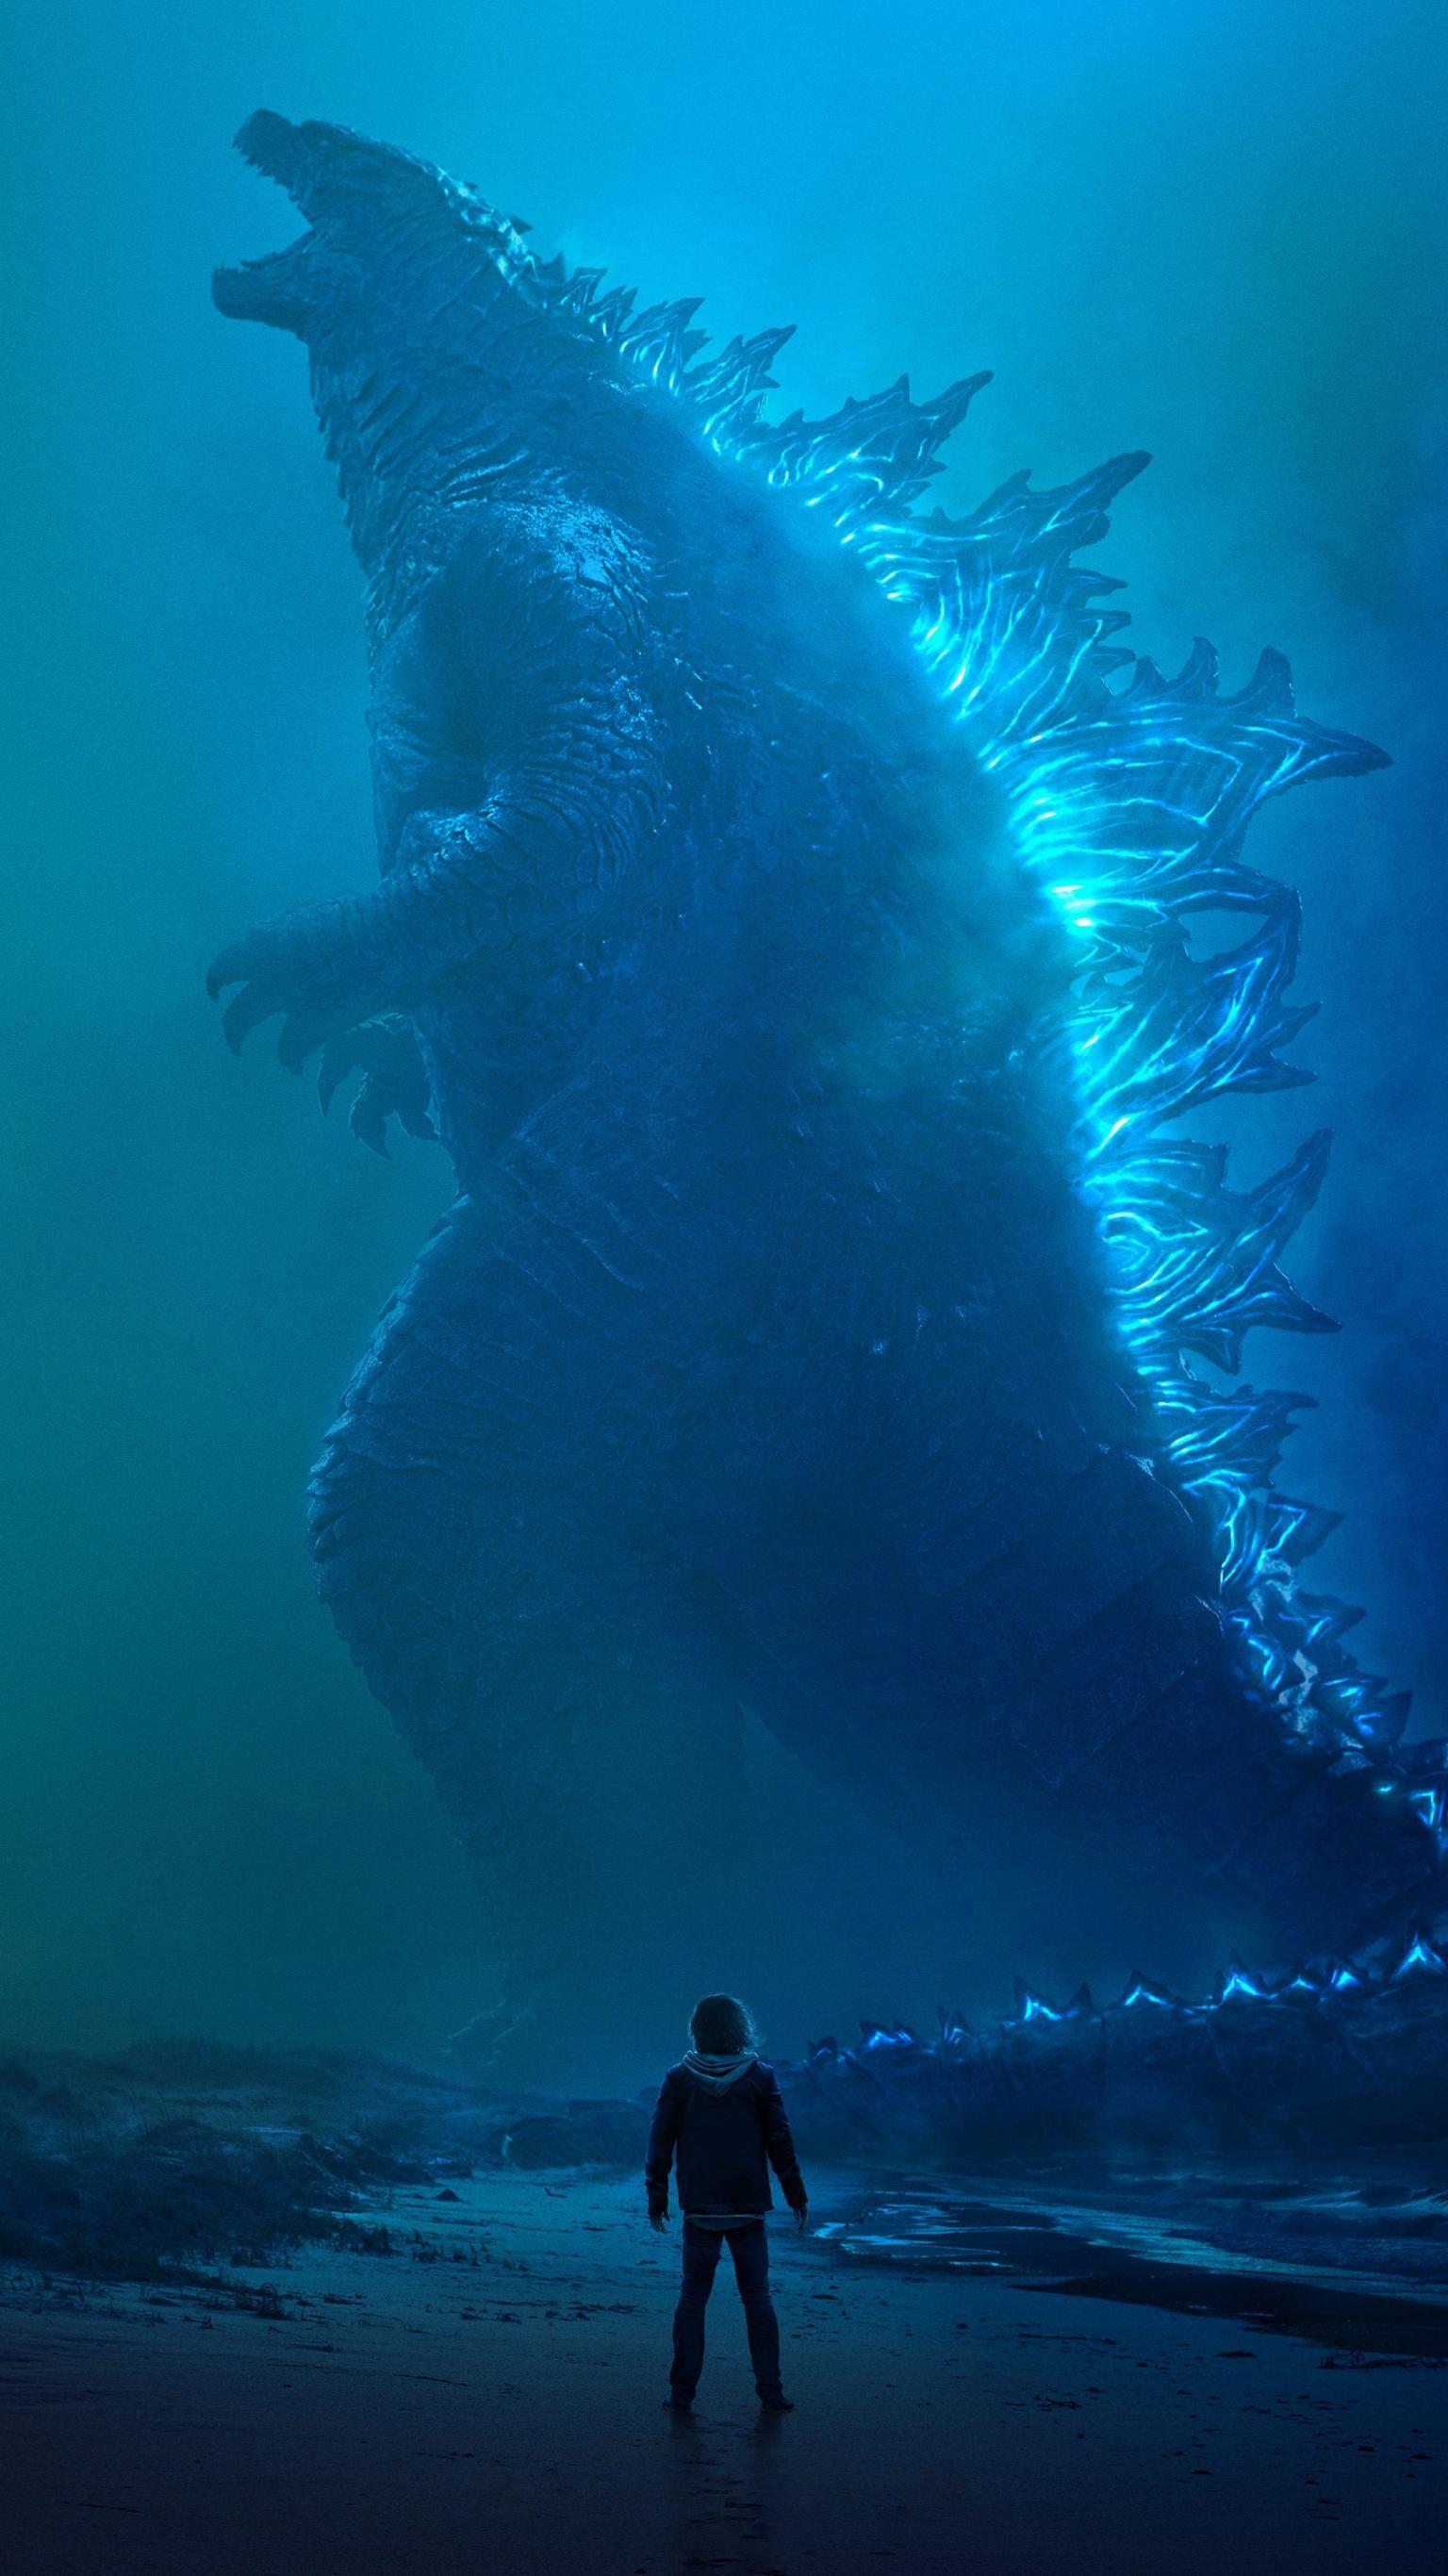 Godzilla: King of the Monsters (2019) Phone Wallpaper in 2019